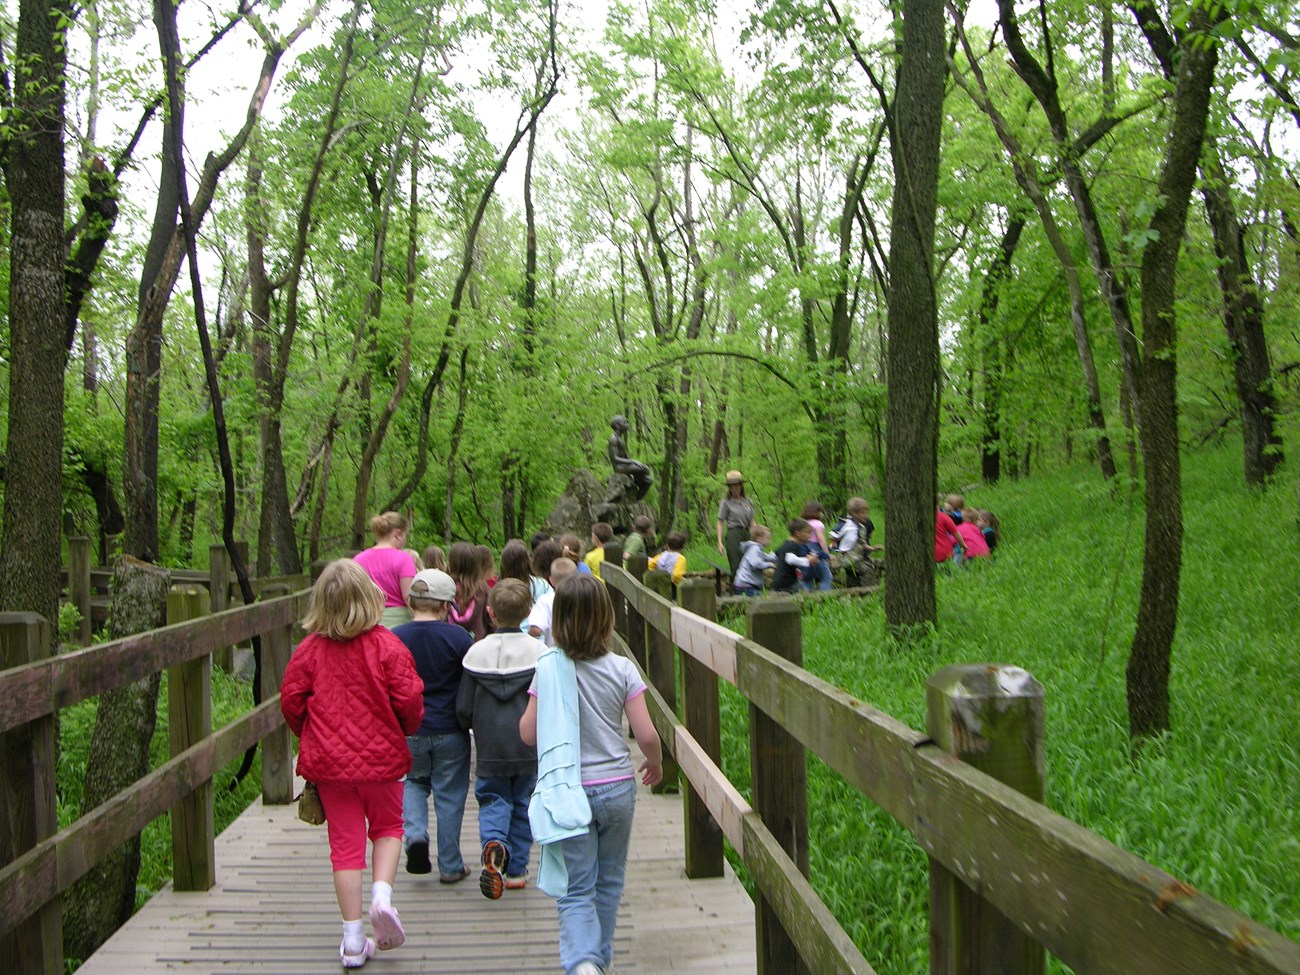 School children on the Carver trail during a field trip. A park ranger is leading the group. Also in the image is a bronze statue of young George Washington Carver.